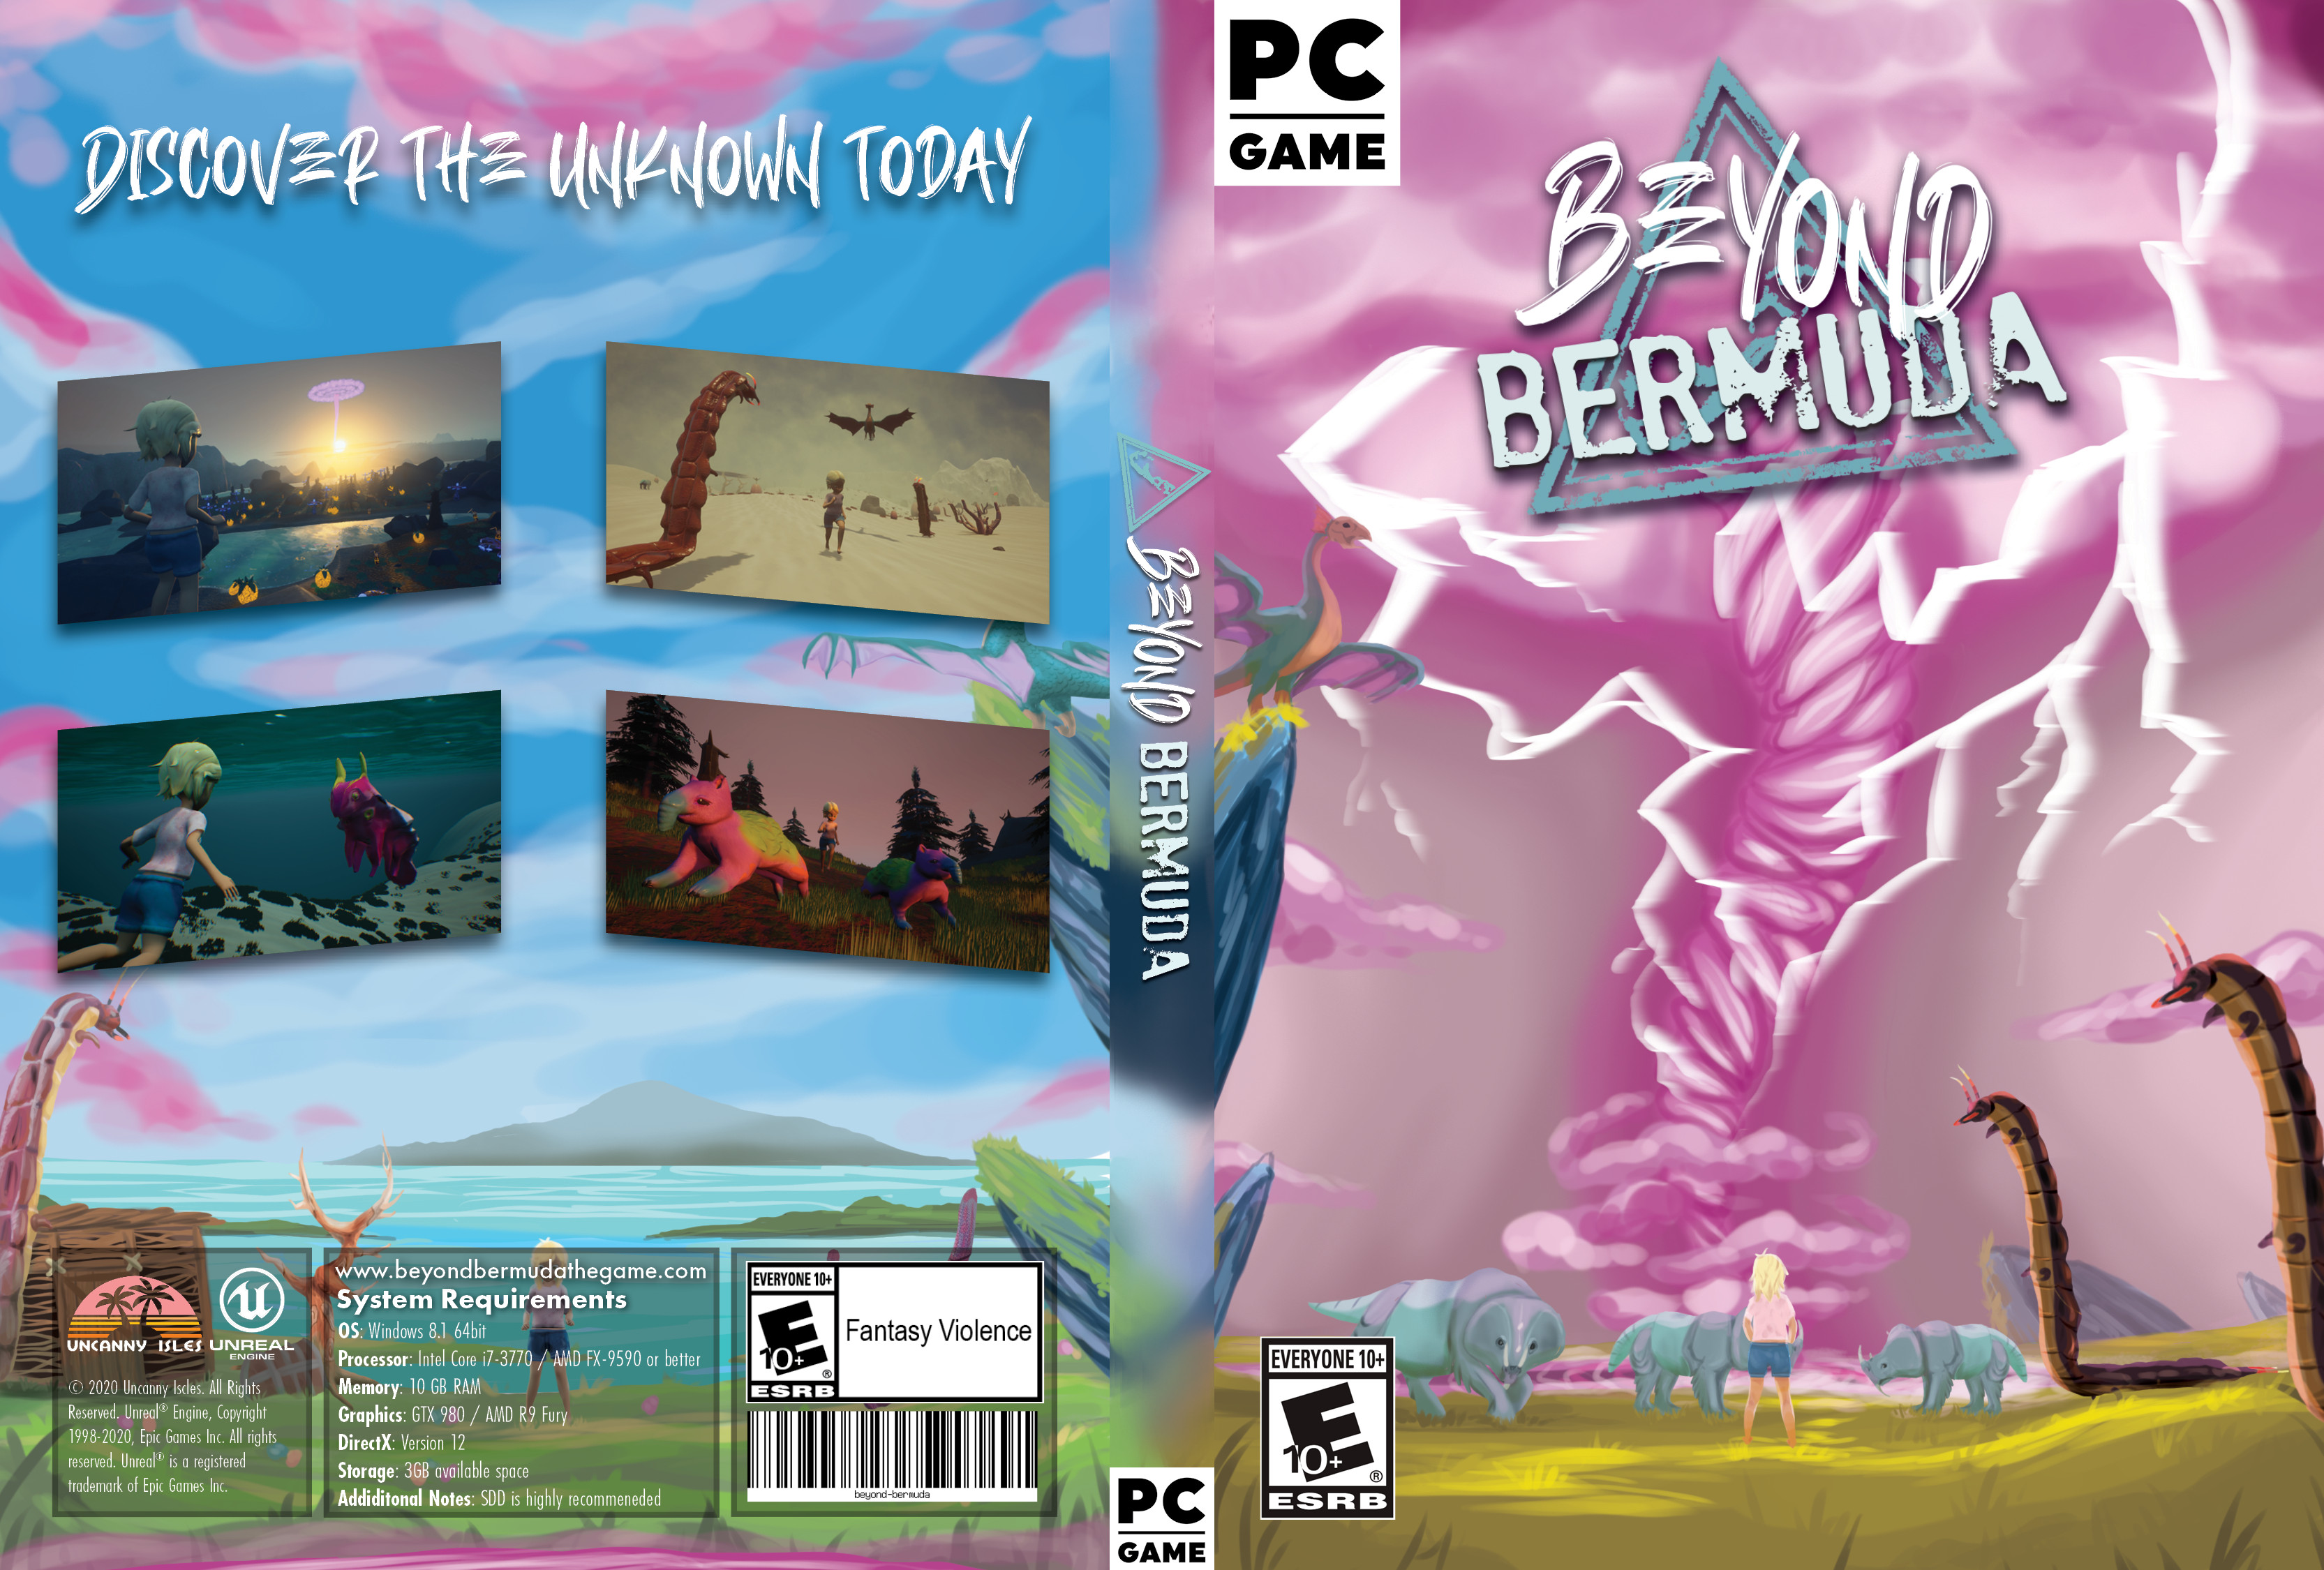 Box Art for the Game